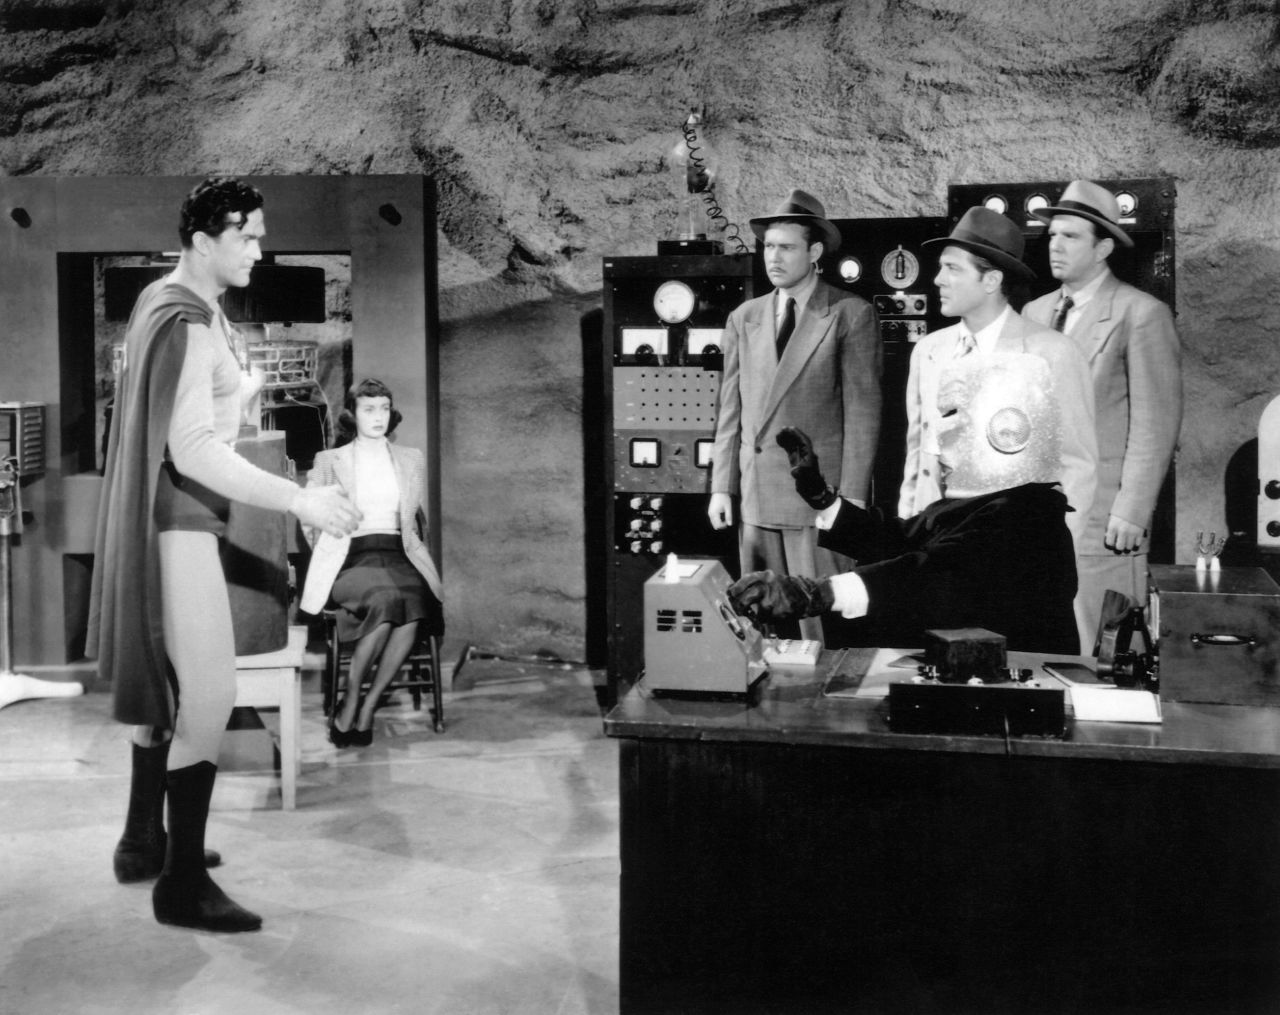 Alyn revisits his role as Superman in the 1950 film serial "Atom Man vs. Superman." Lyle Talbot, seated at right, plays the supervillain Lex Luthor, the Atom Man.